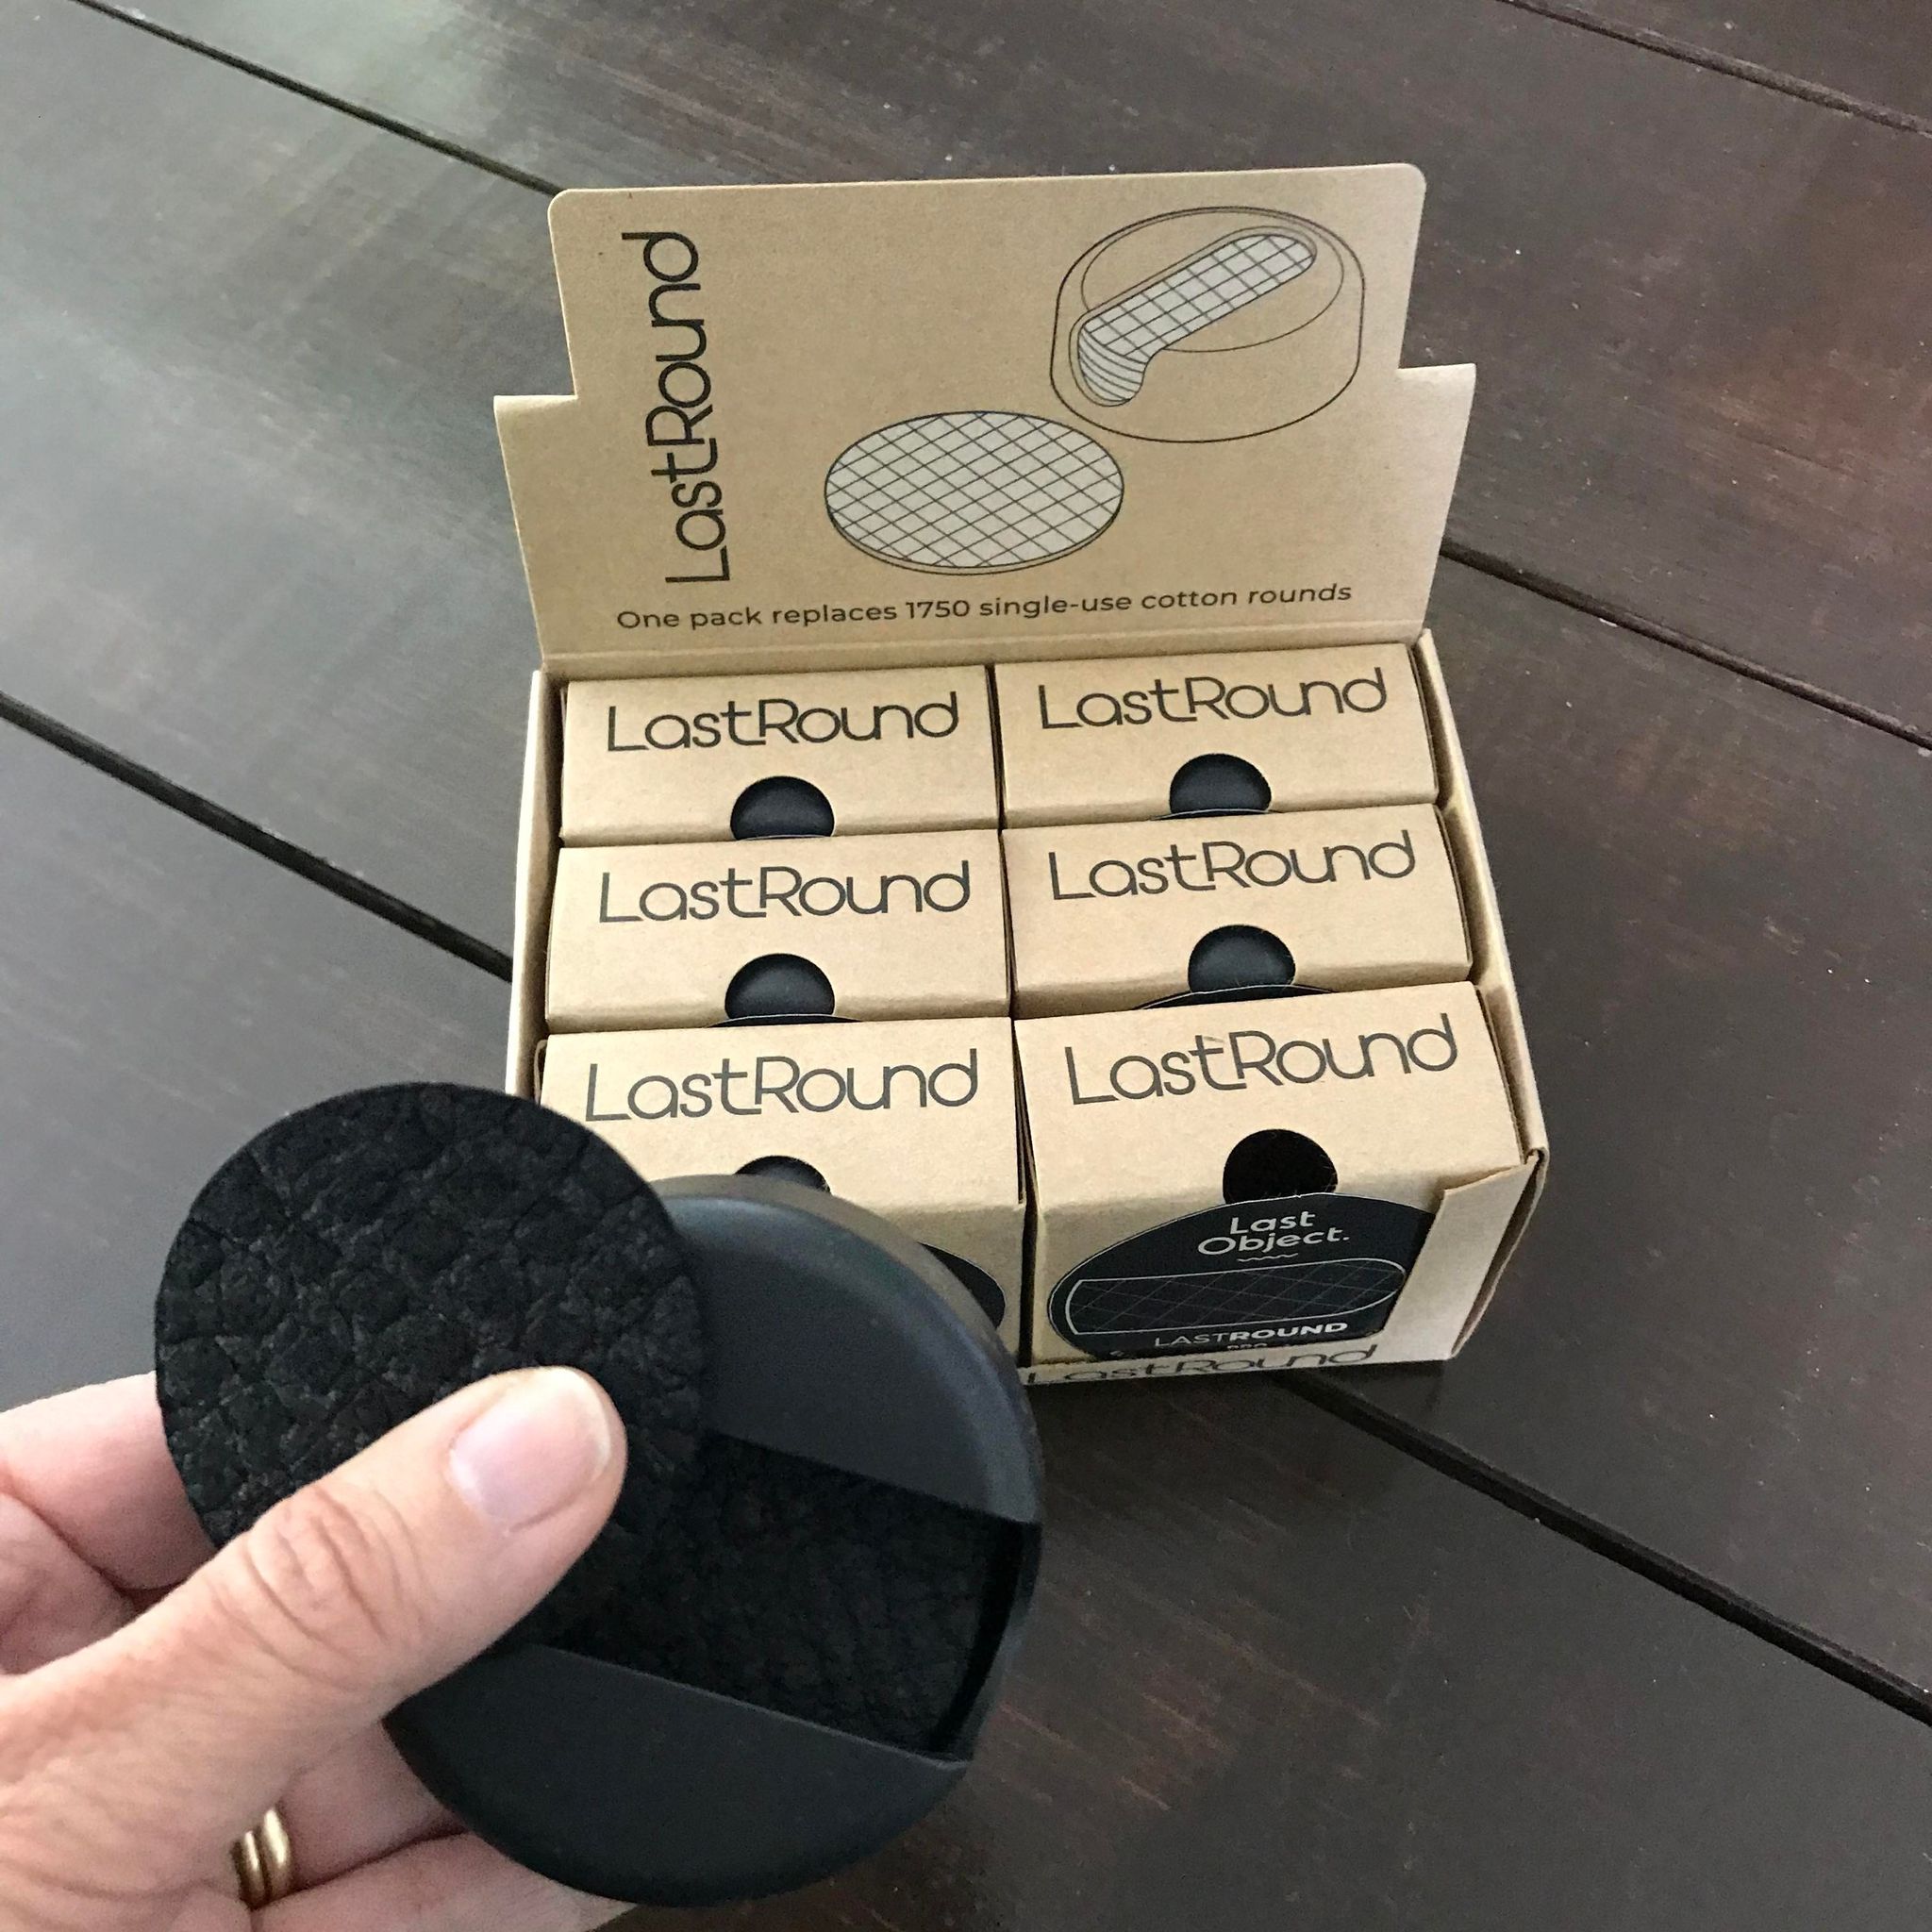 LastRound black regular size reusable cotton rounds in a black case held in front of a display case of the same reusable makeup remover pads in boxes